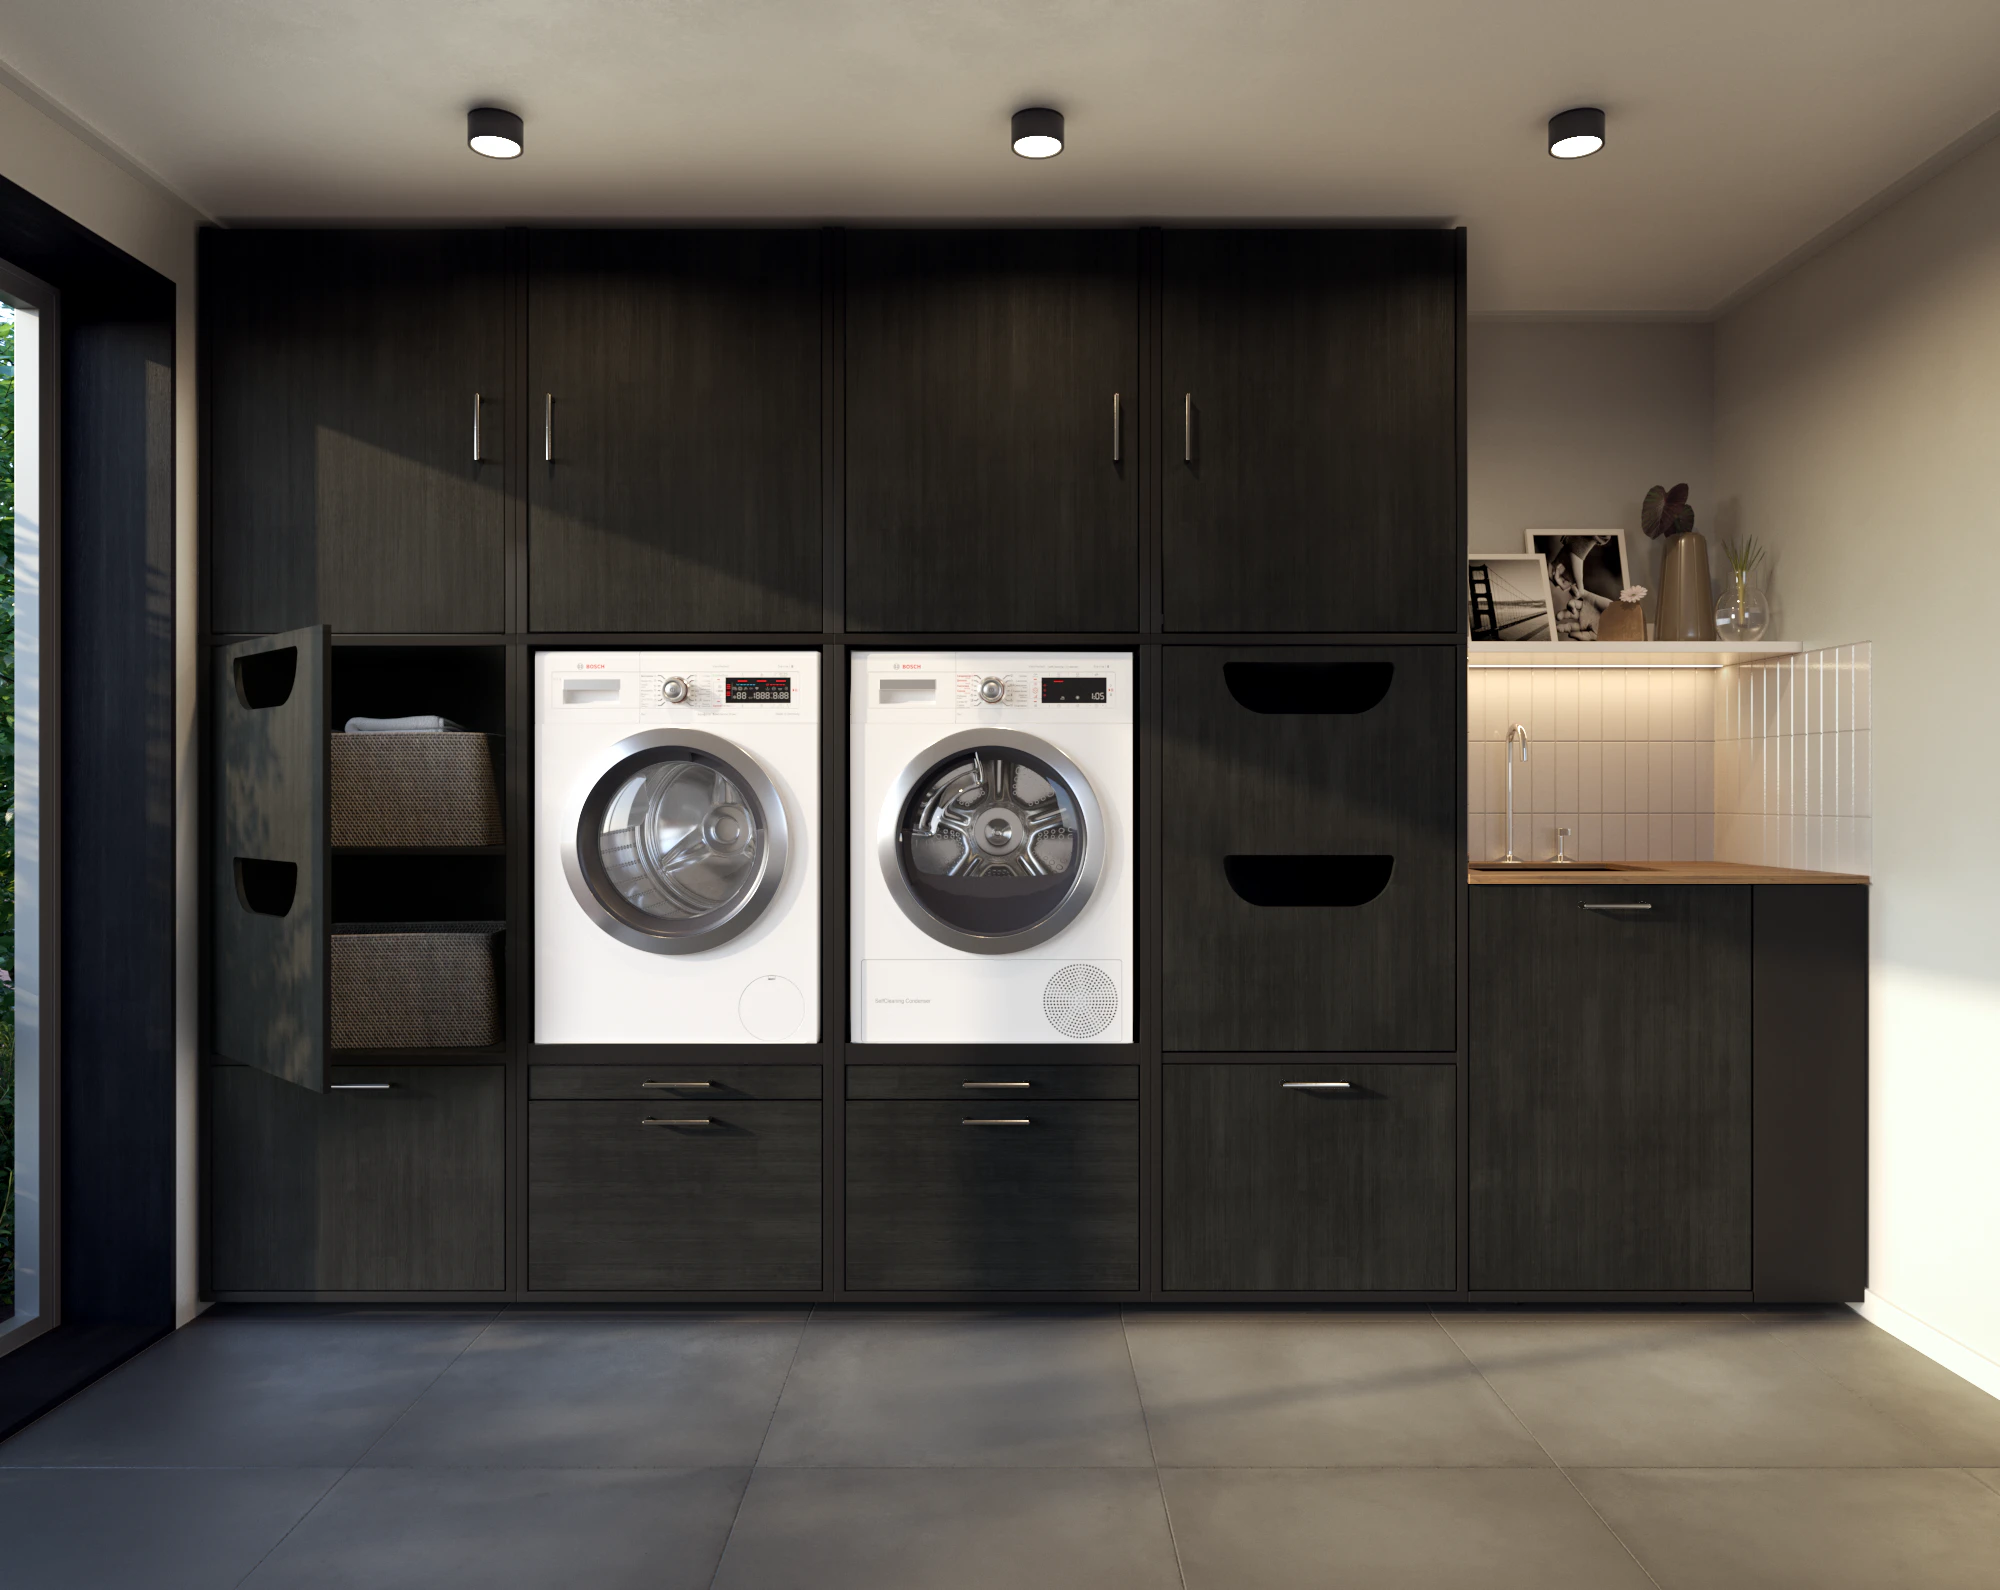 Lifestyle black washing machine and dryer wall cupboard with open laundry basket cabinet in scullery